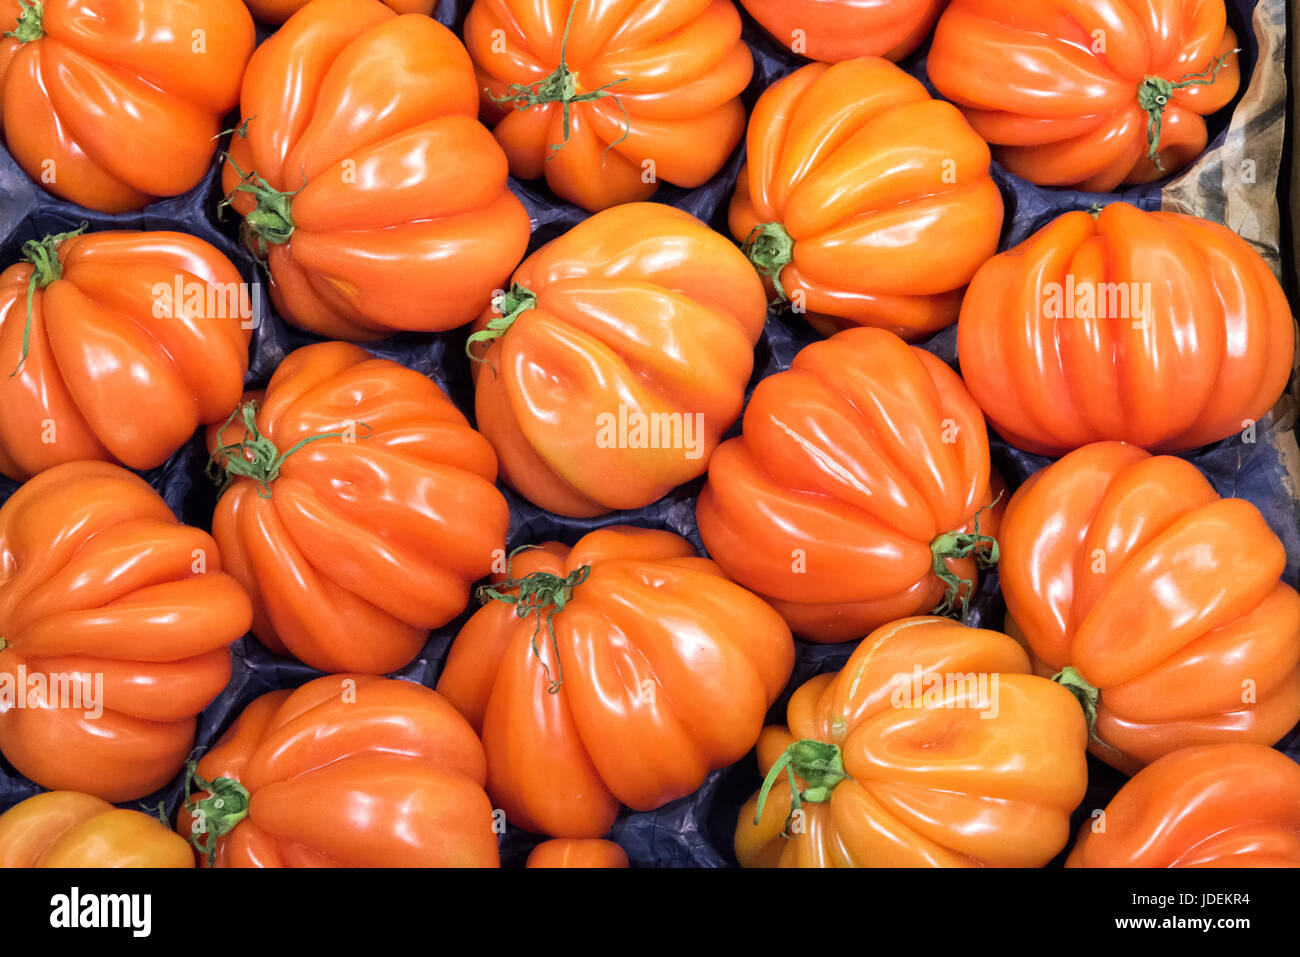 Beefsteak tomatoes for sale at a market Stock Photo